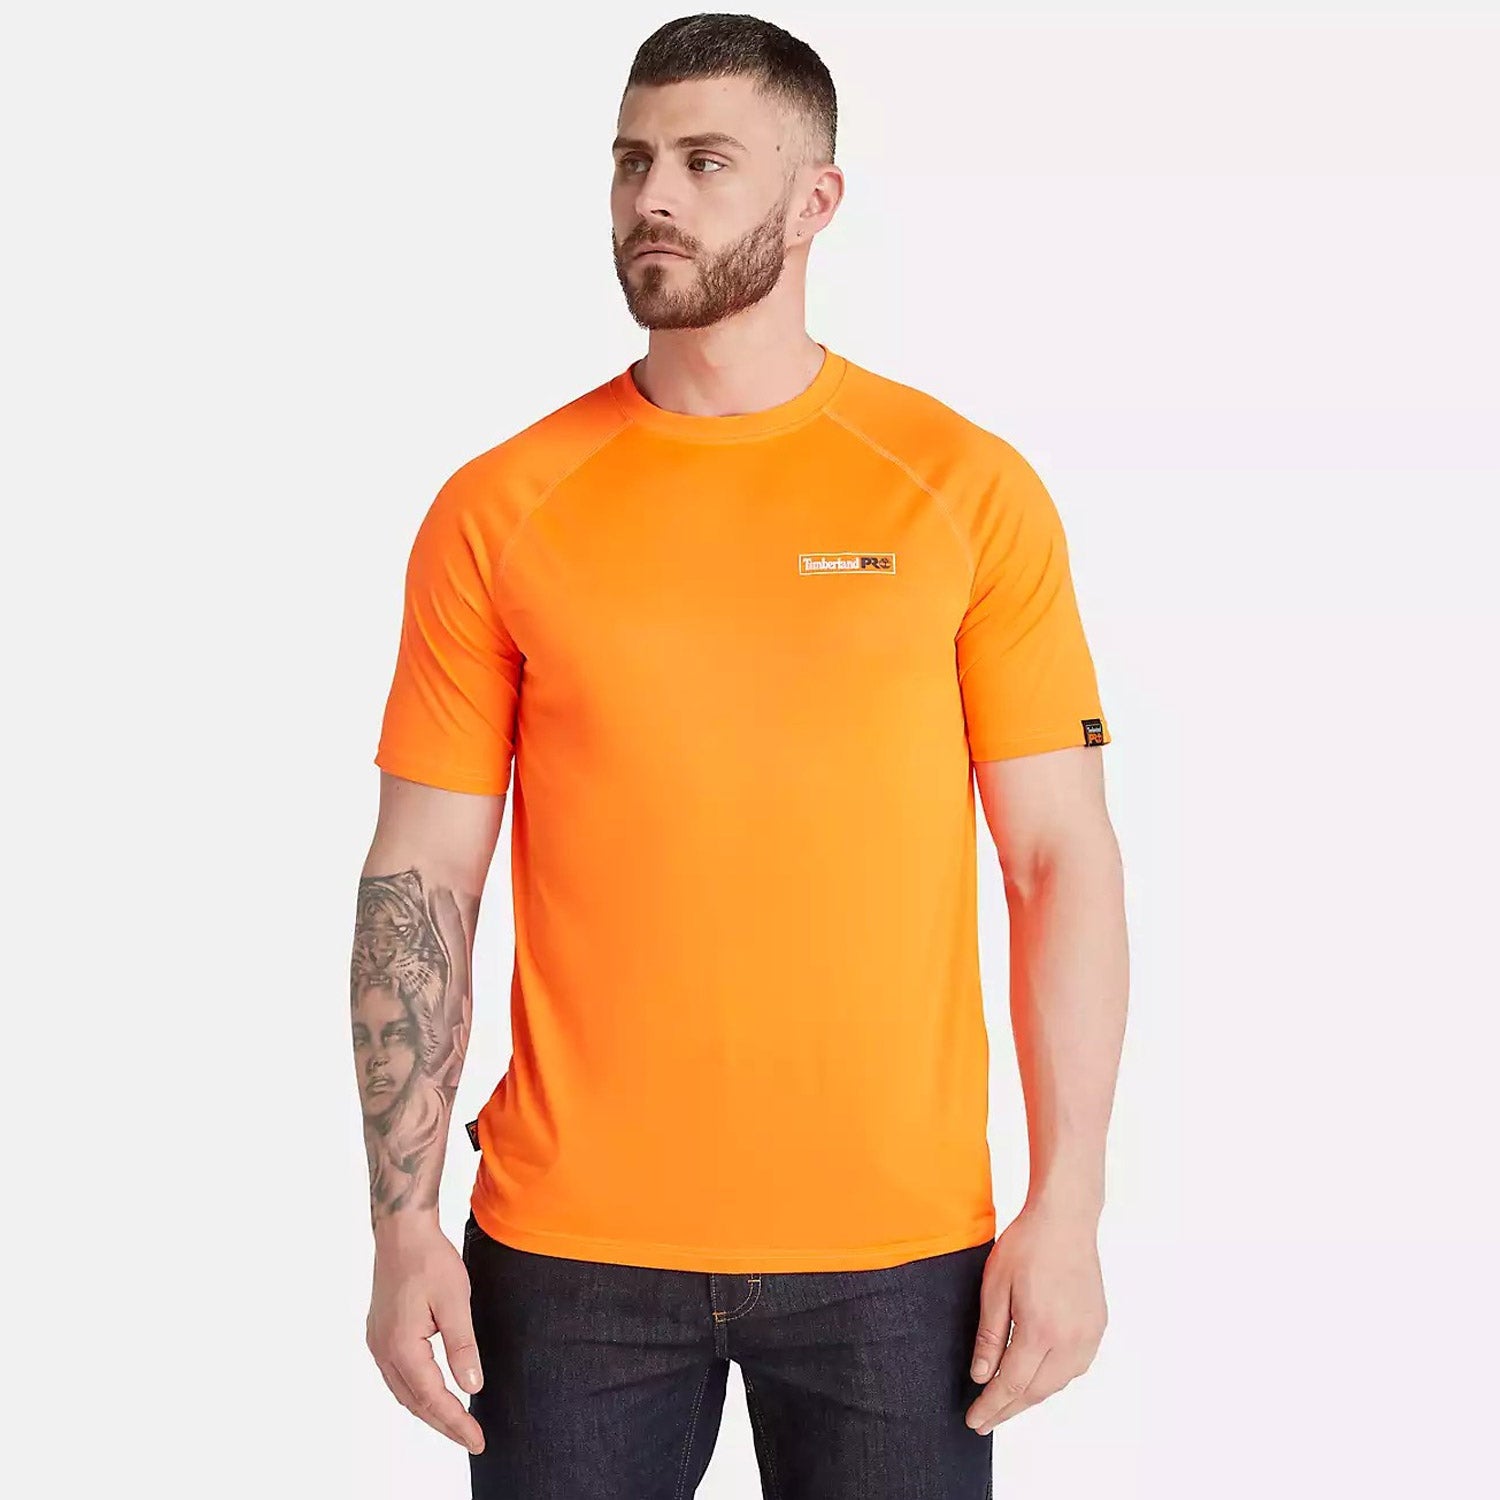 Timberland PRO Men's Wicking Good Athletic-Fit Short Sleeve T-Shirt - Work World - Workwear, Work Boots, Safety Gear